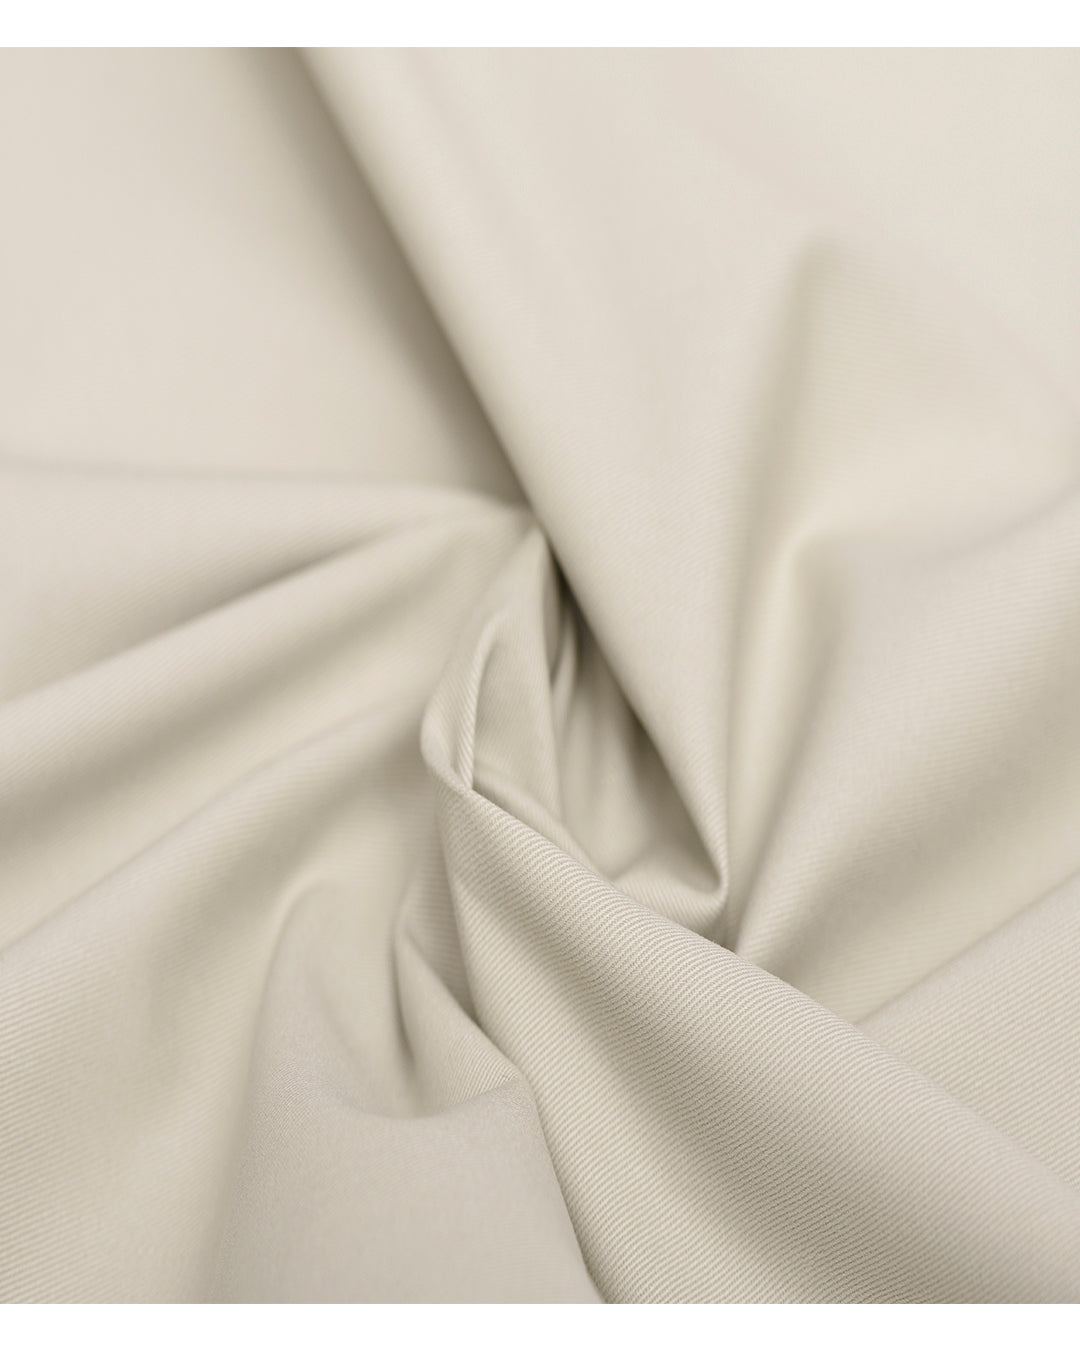 Closeup view of custom Genoa Chino pants for men by Luxire in light beige